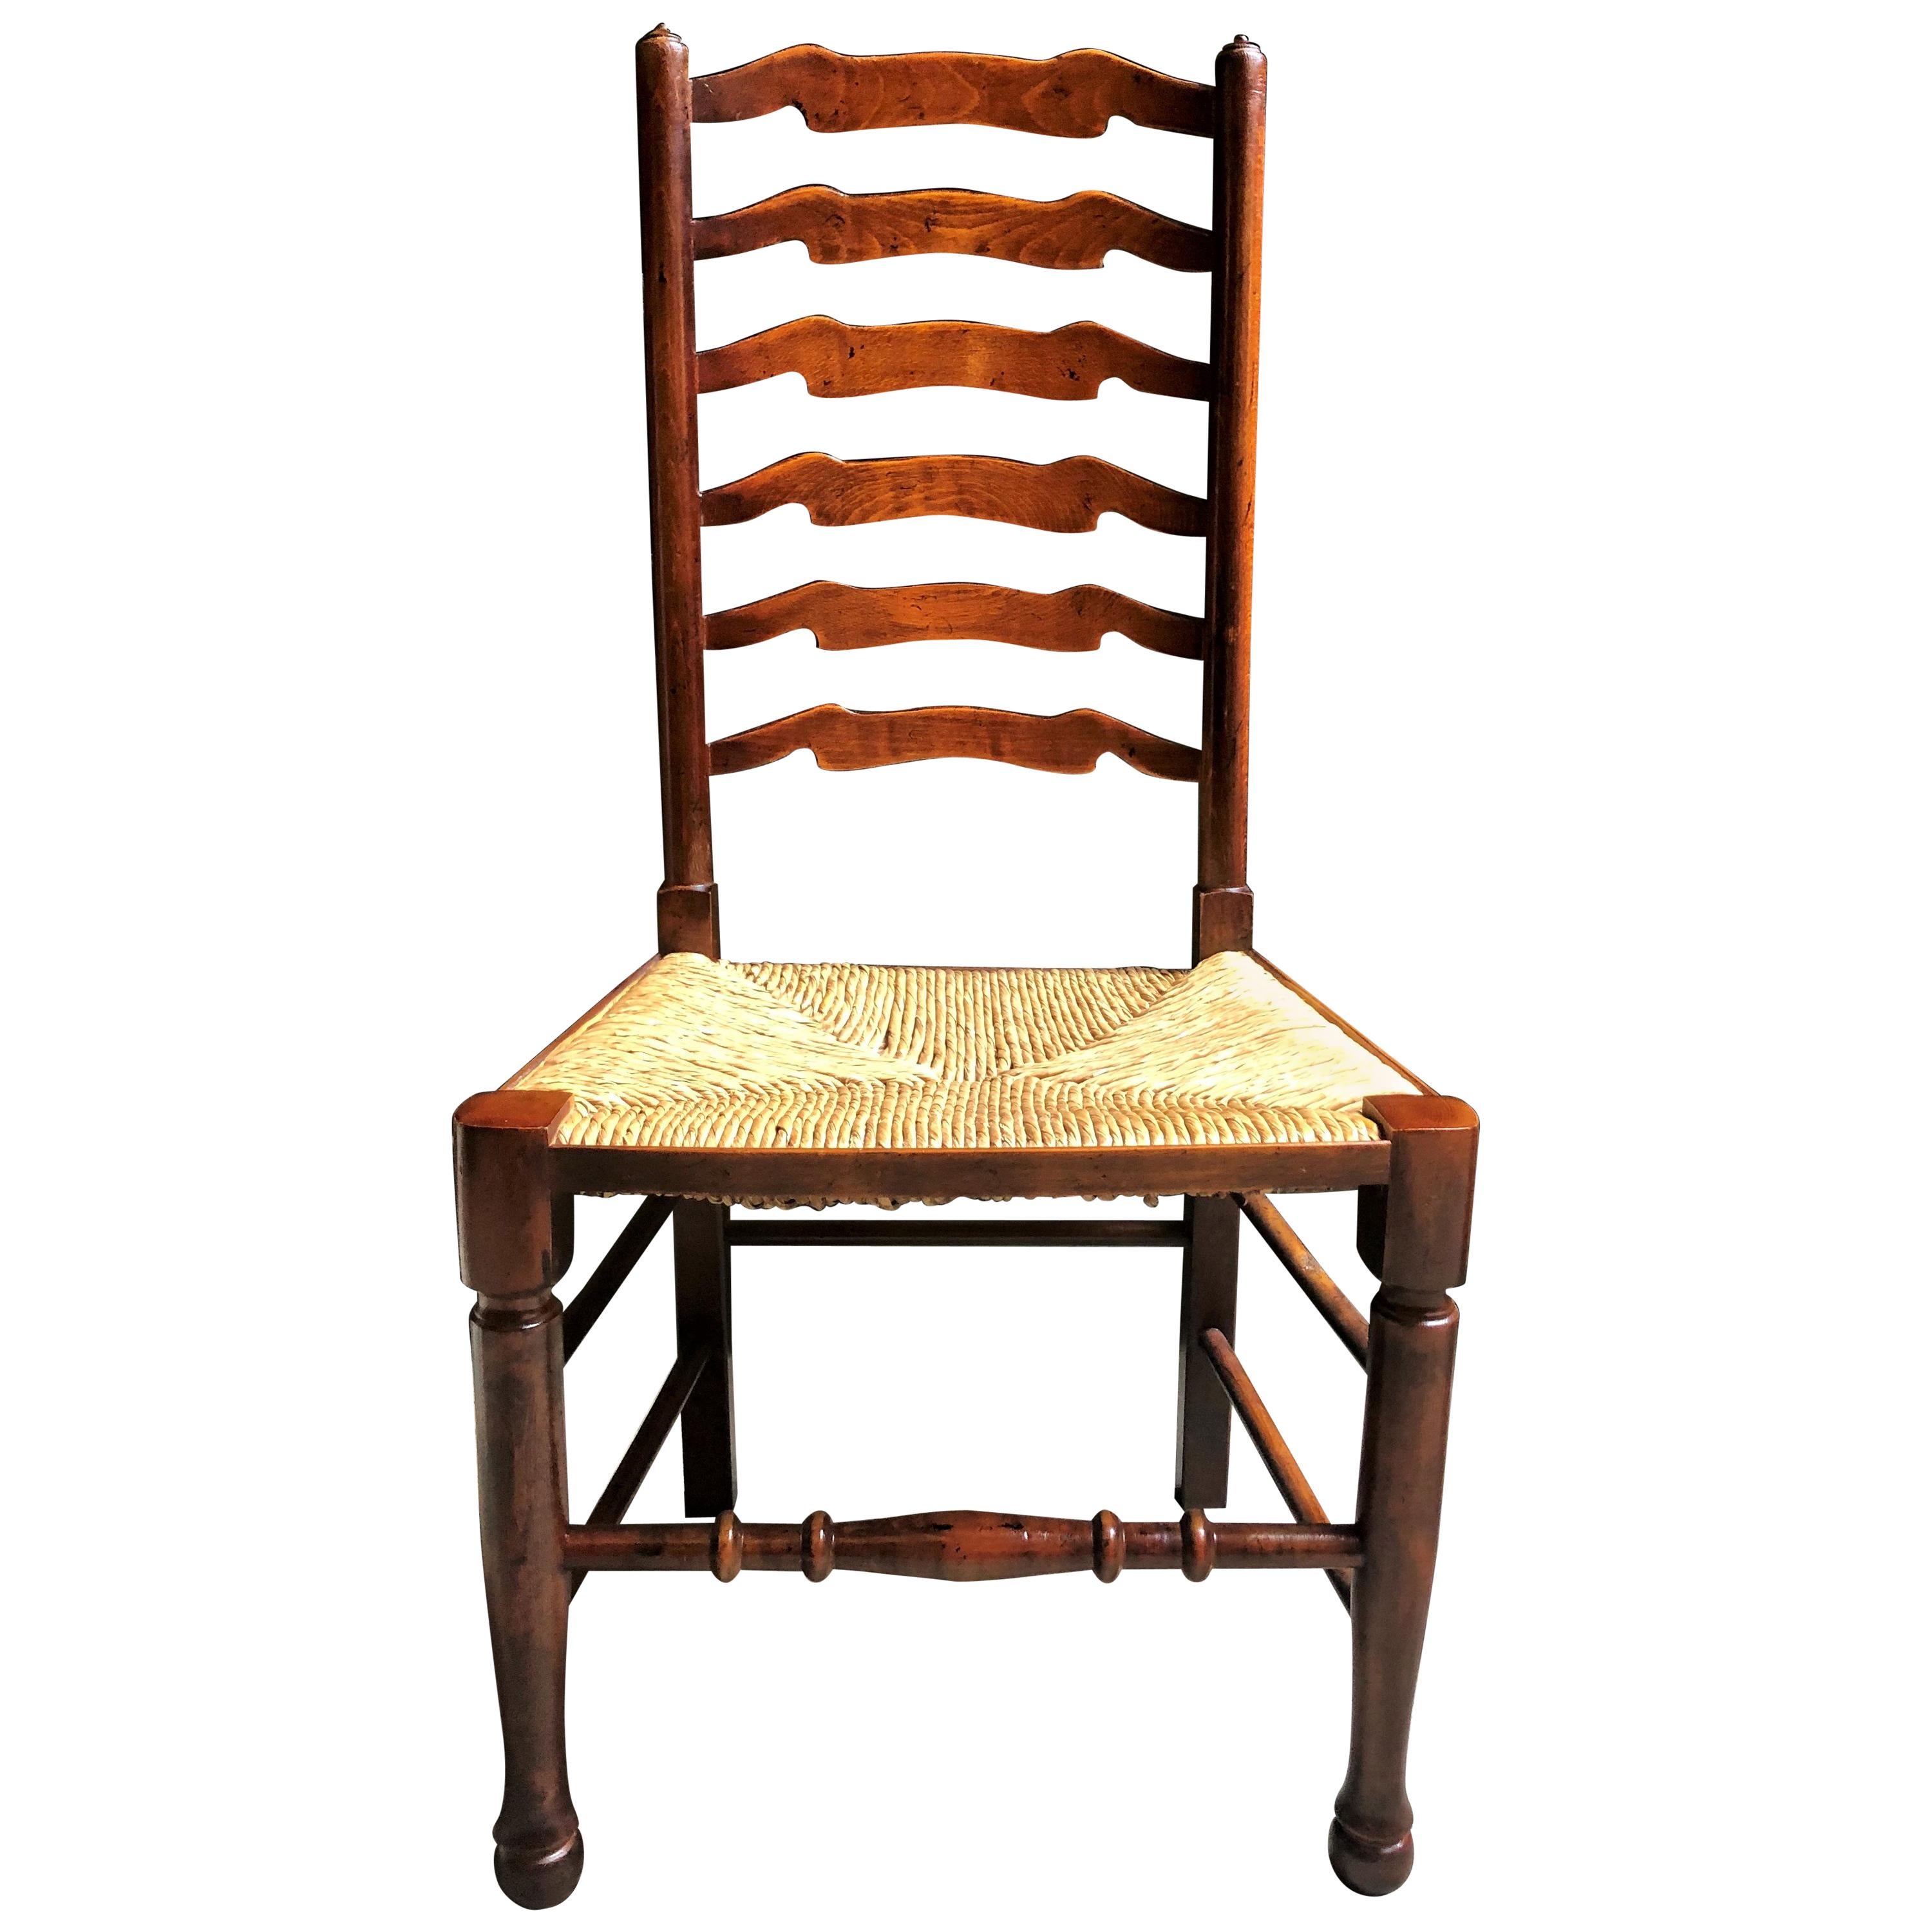 Set of 8 Estate English Ladder Back Chairs with Rush Seats, circa 1940